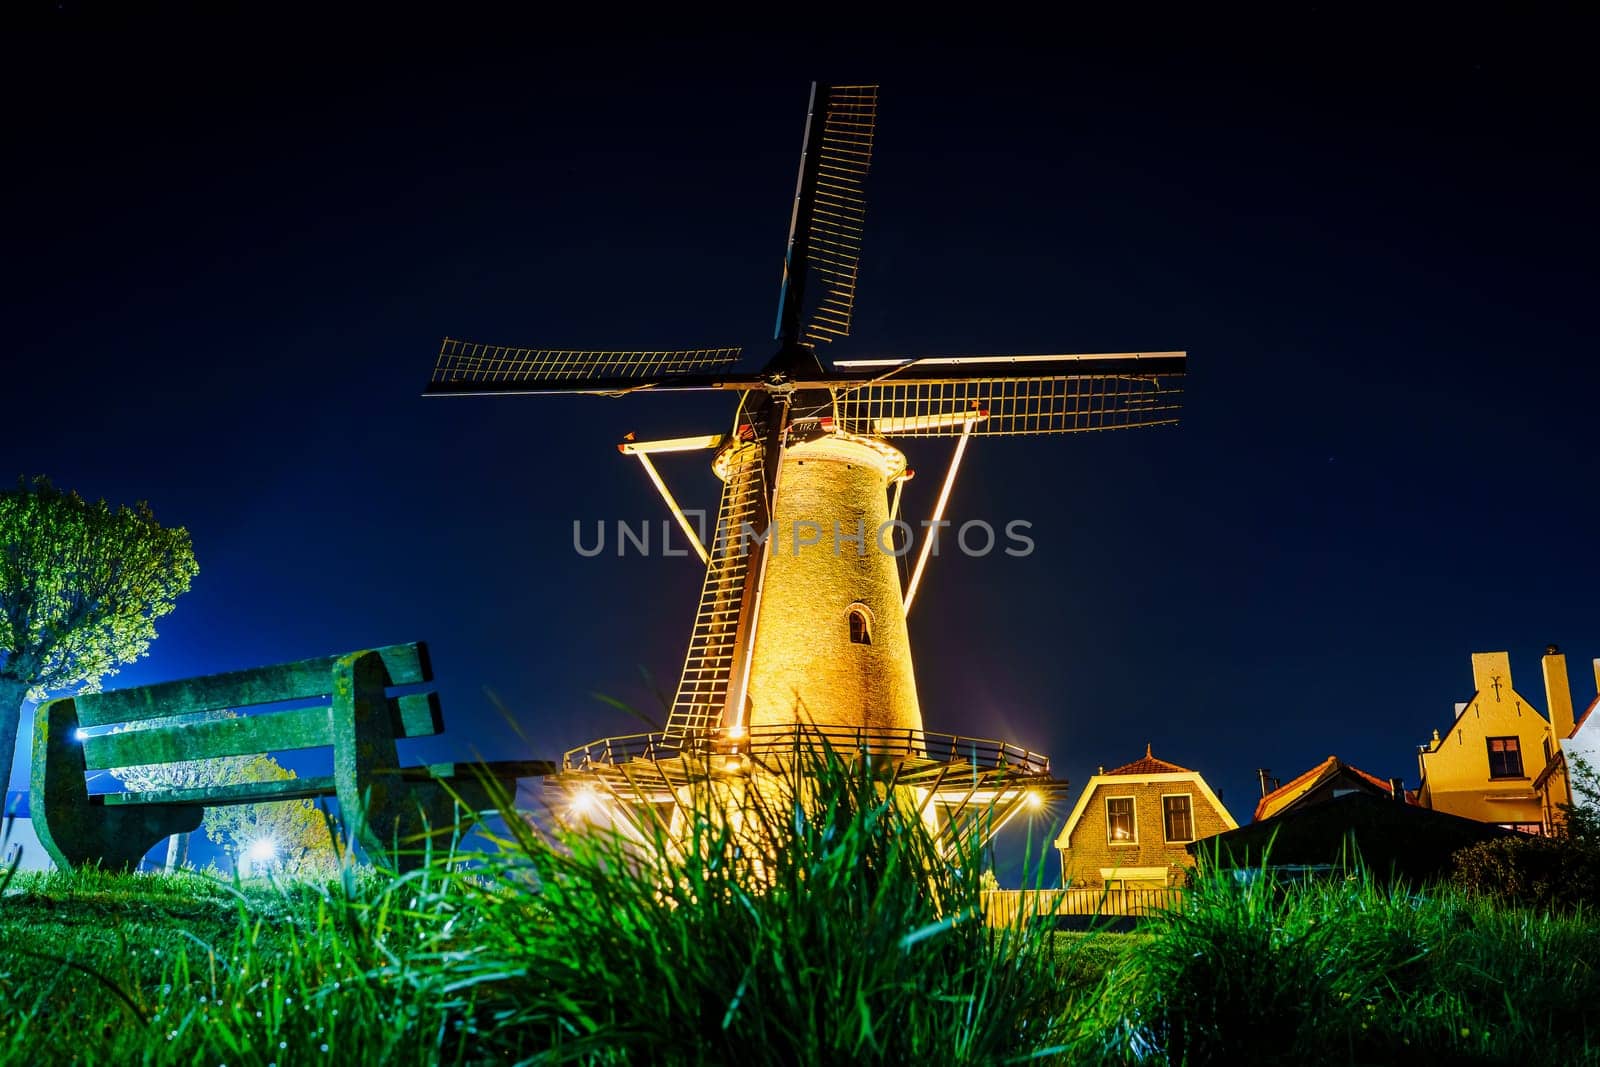 A serene night scene in Zierikzee, Netherlands, capturing the mesmerizing beauty of an old windmill adorned with enchanting lights, providing a captivating and tranquil atmosphere.